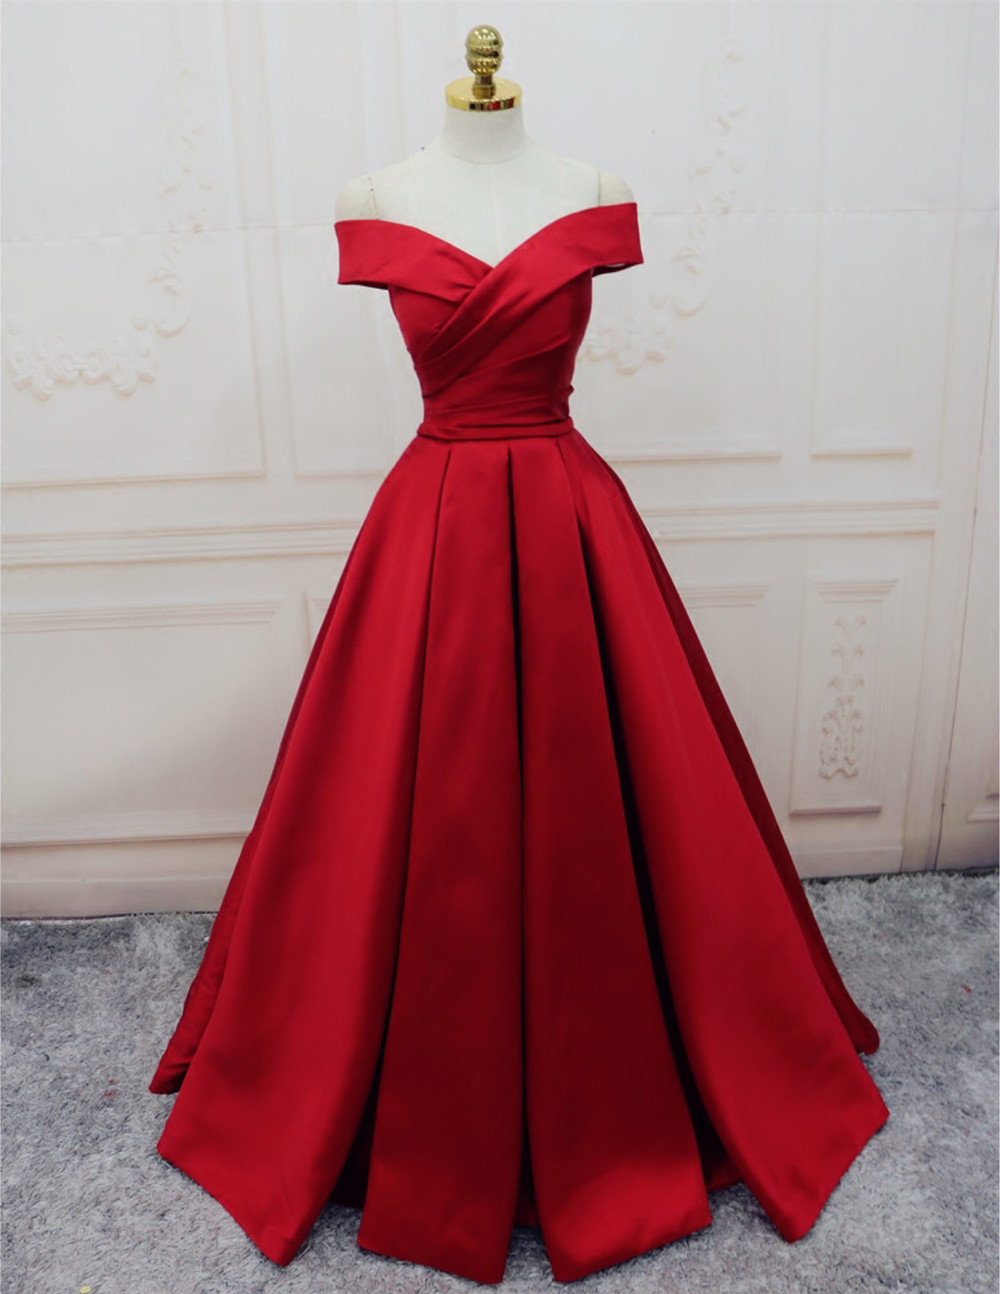 Red Off-the-shoulder Satin A-line Floor-length Prom Dress, Evening Dress Featuring Lace-up Back